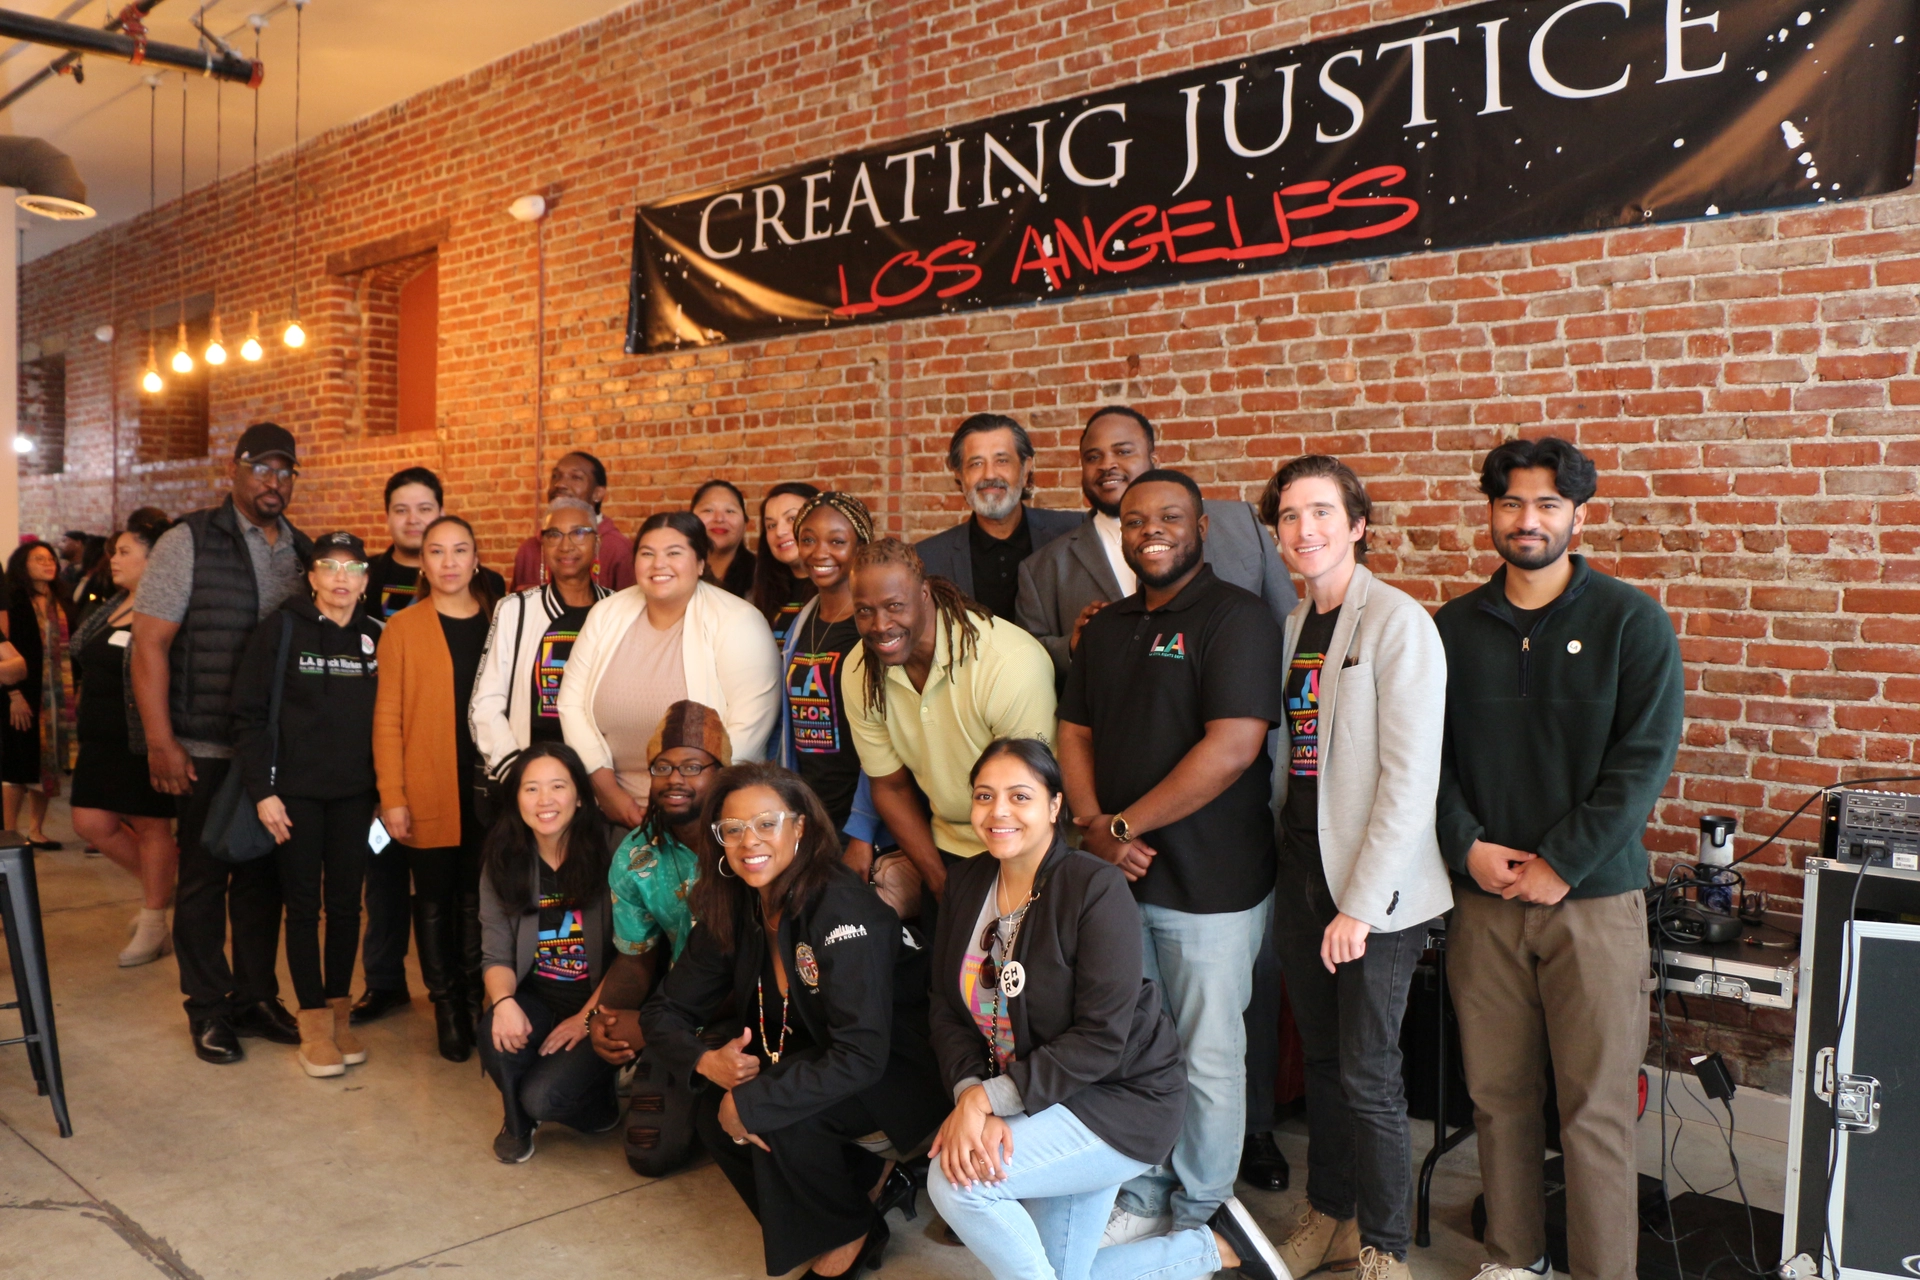 LA Civil Rights and Creating Justice group photo